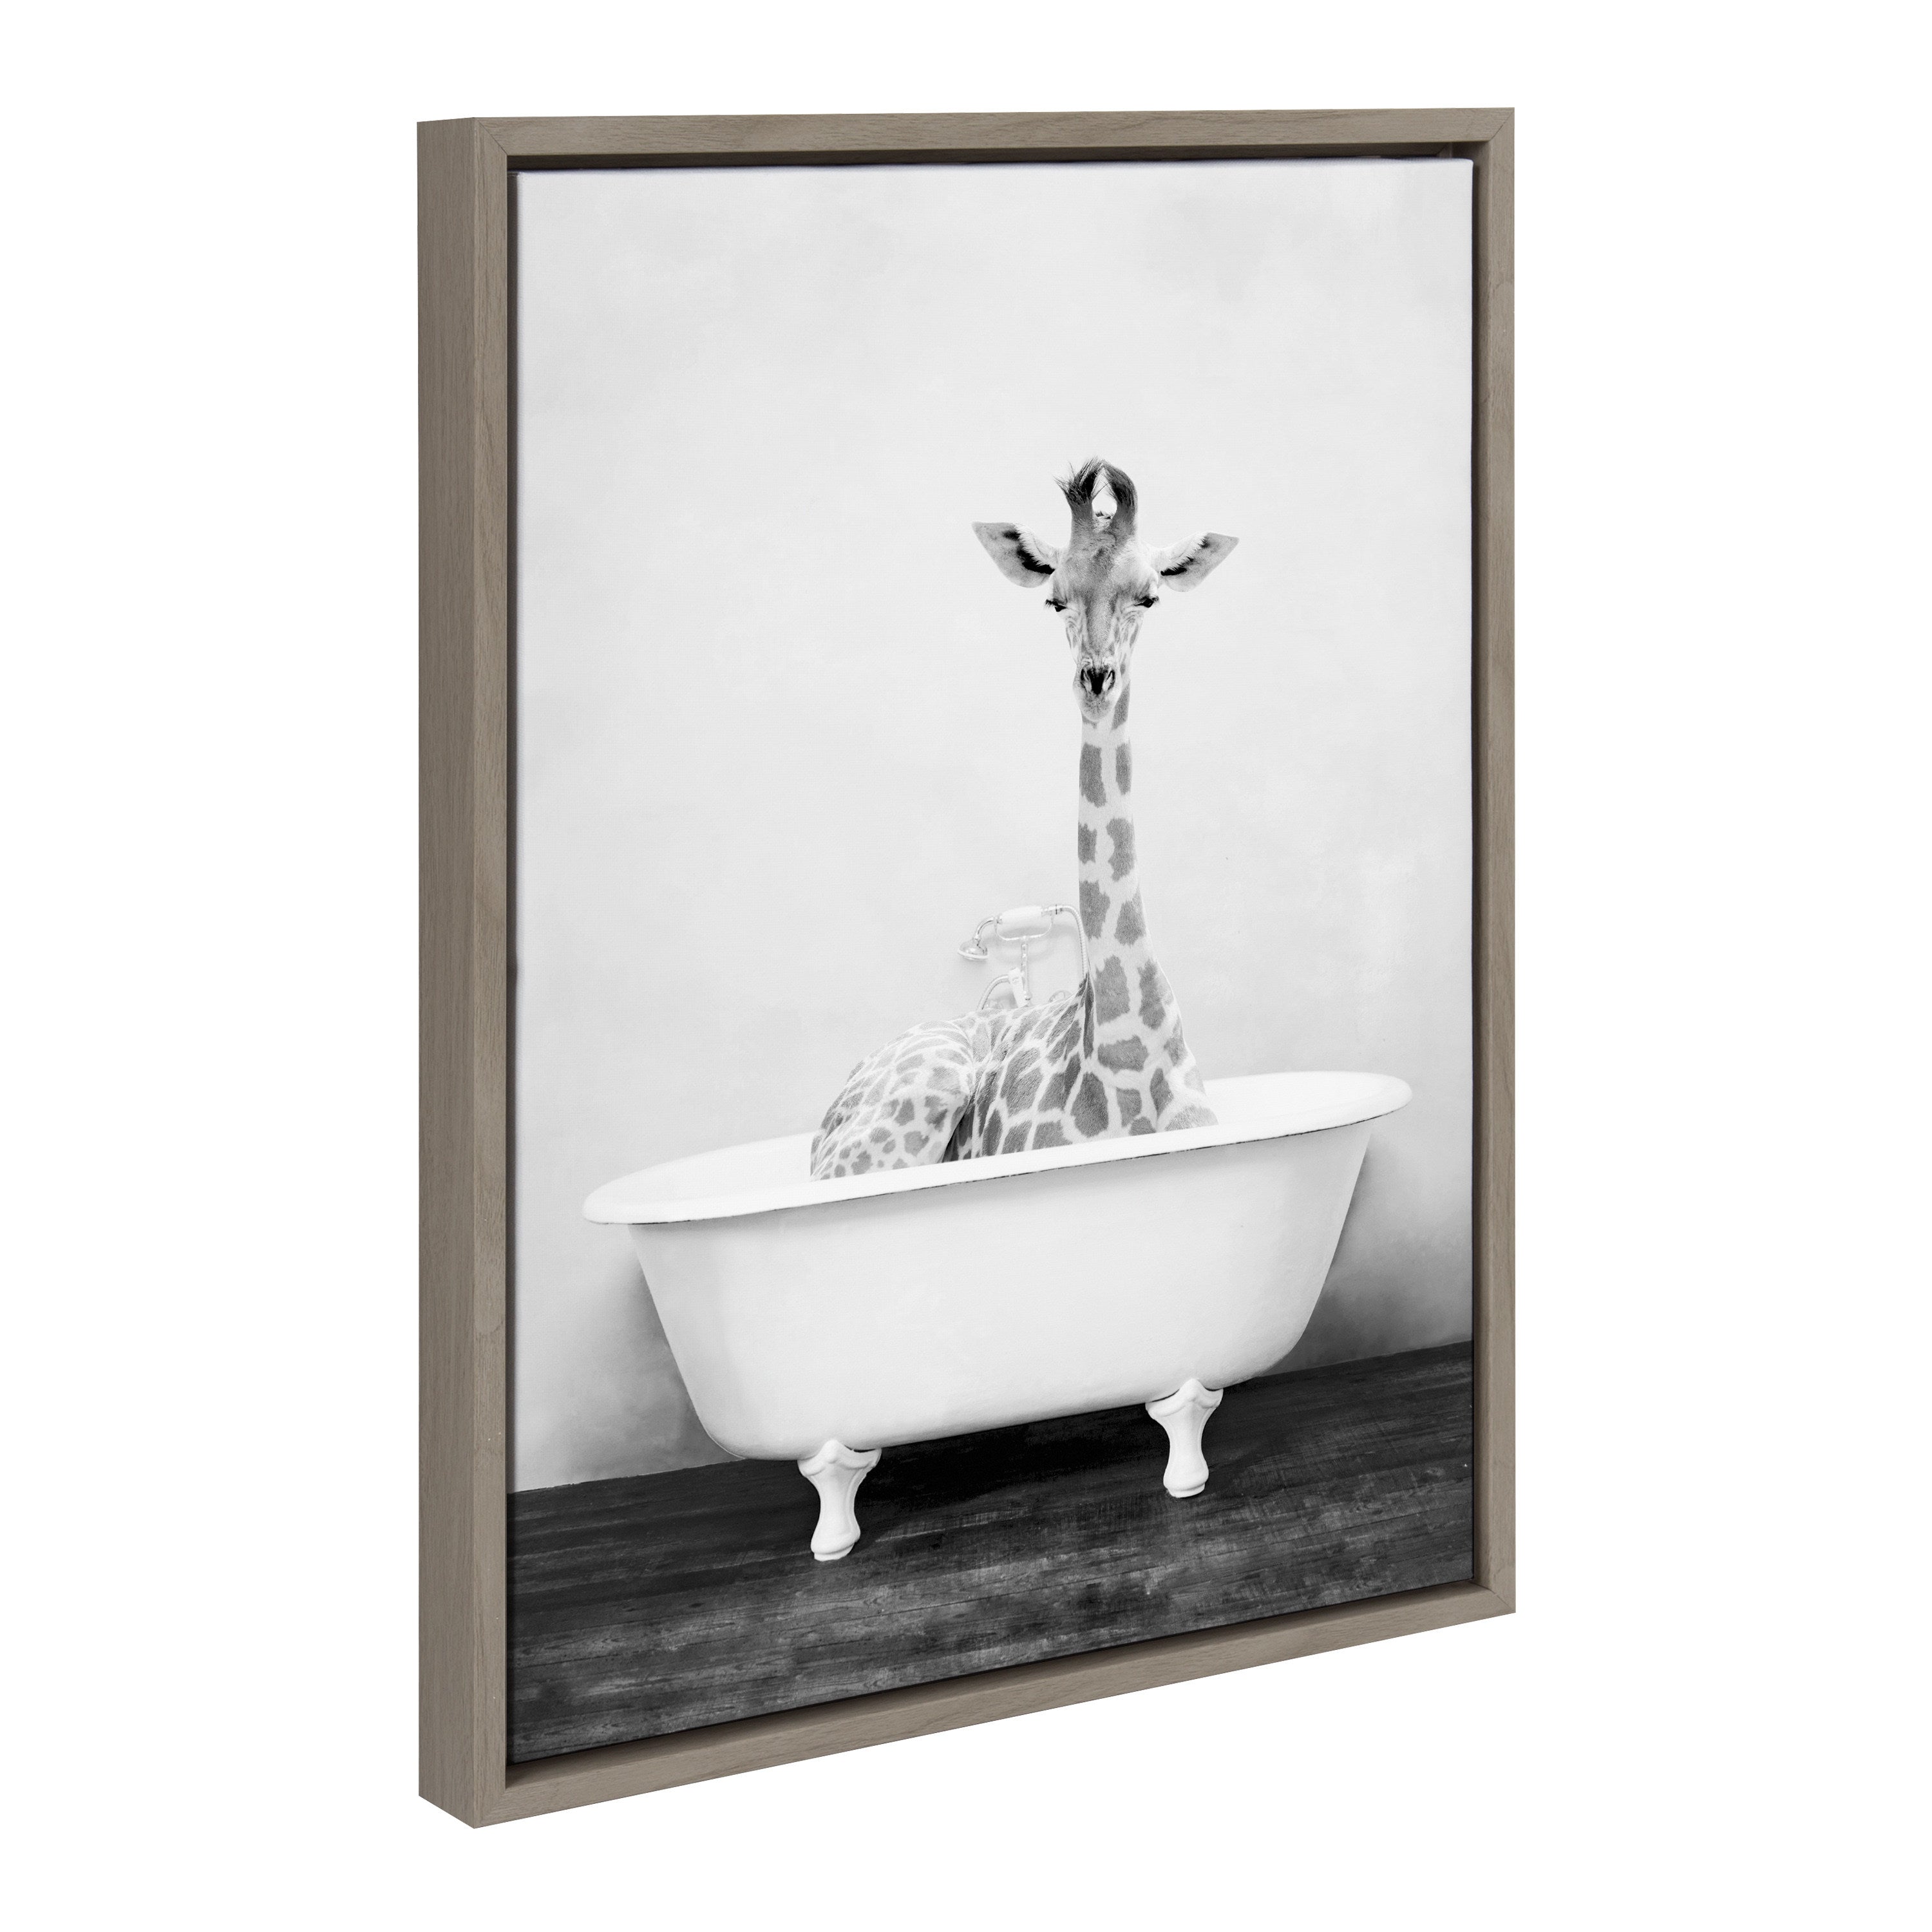 Sylvie Giraffe 2 in the Tub Framed Canvas by Amy Peterson Art Studio